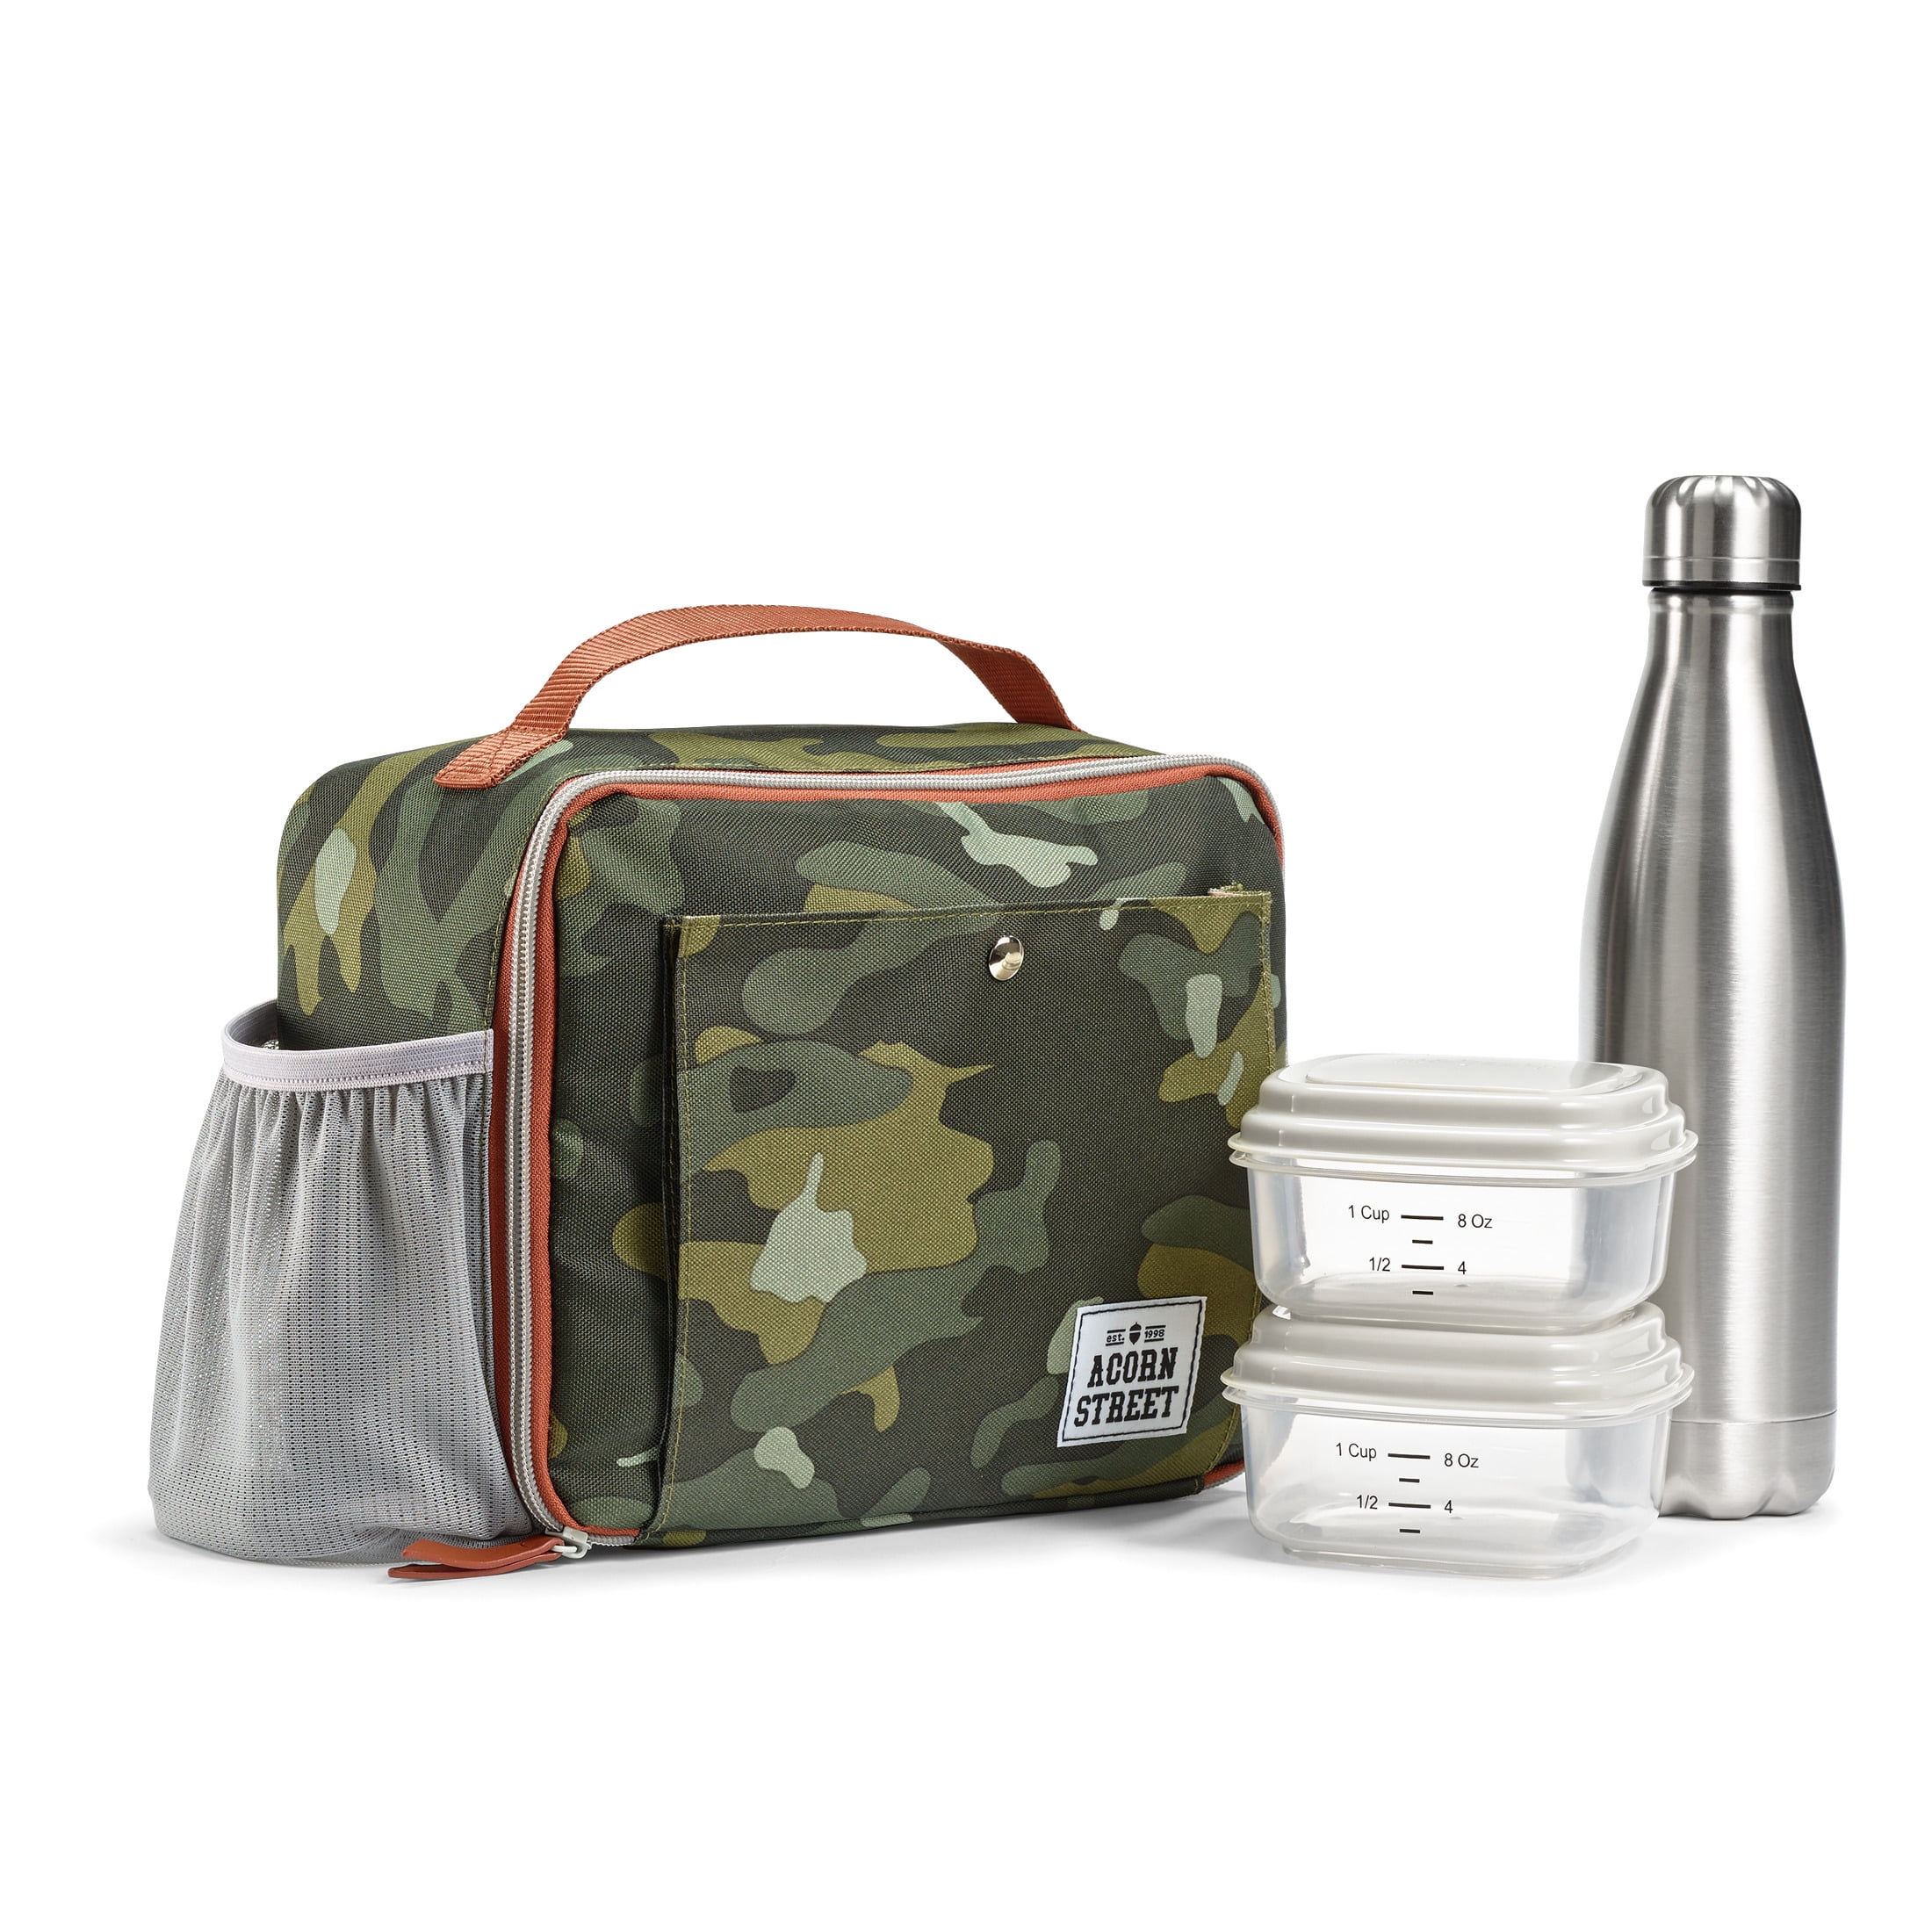 Urban Food Casual - Insulated Lunch Bag, 3L Capacity, 4 Plastic Food  Storage Containers (2 x 0.5 L, 2 x 0.2 L) BPA Free, Camouflage. Measure  22.5 x 10